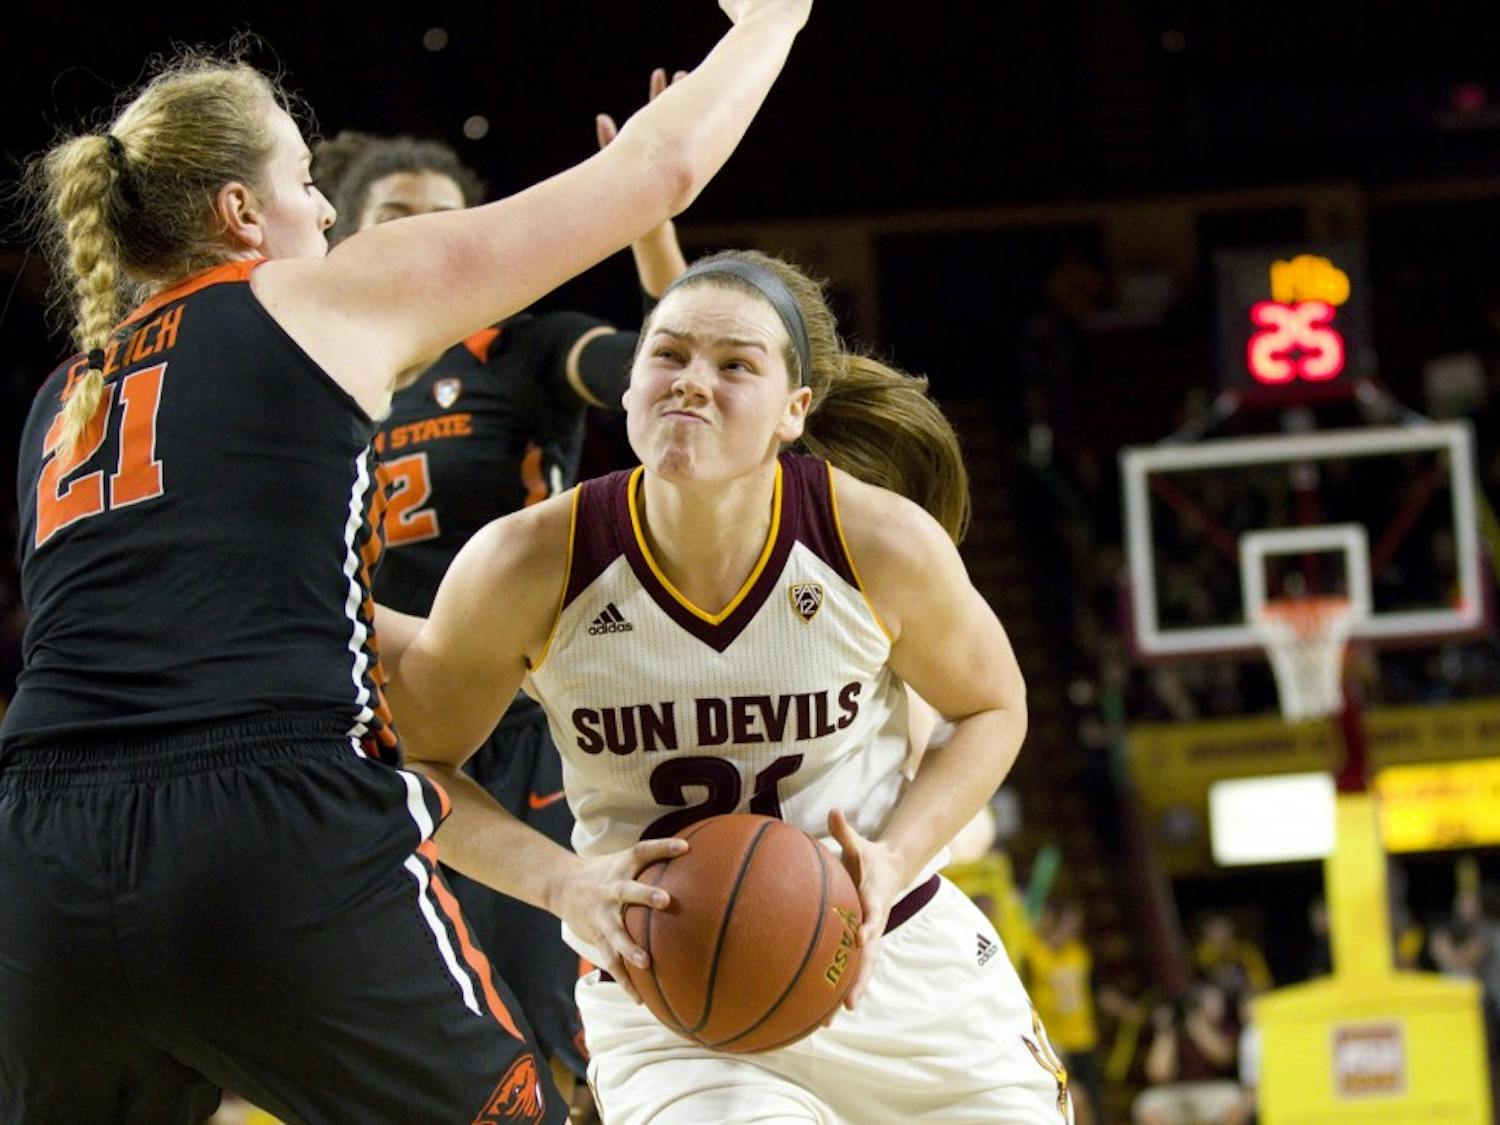 ASU senior forward Sophie Brunner (21) drives towards the basket during the women's basketball game versus the Oregon State Beavers in Wells Fargo Arena in Tempe, Arizona on Friday, Feb. 3, 2017. ASU lost 54-45. (Josh Orcutt/State Press) 